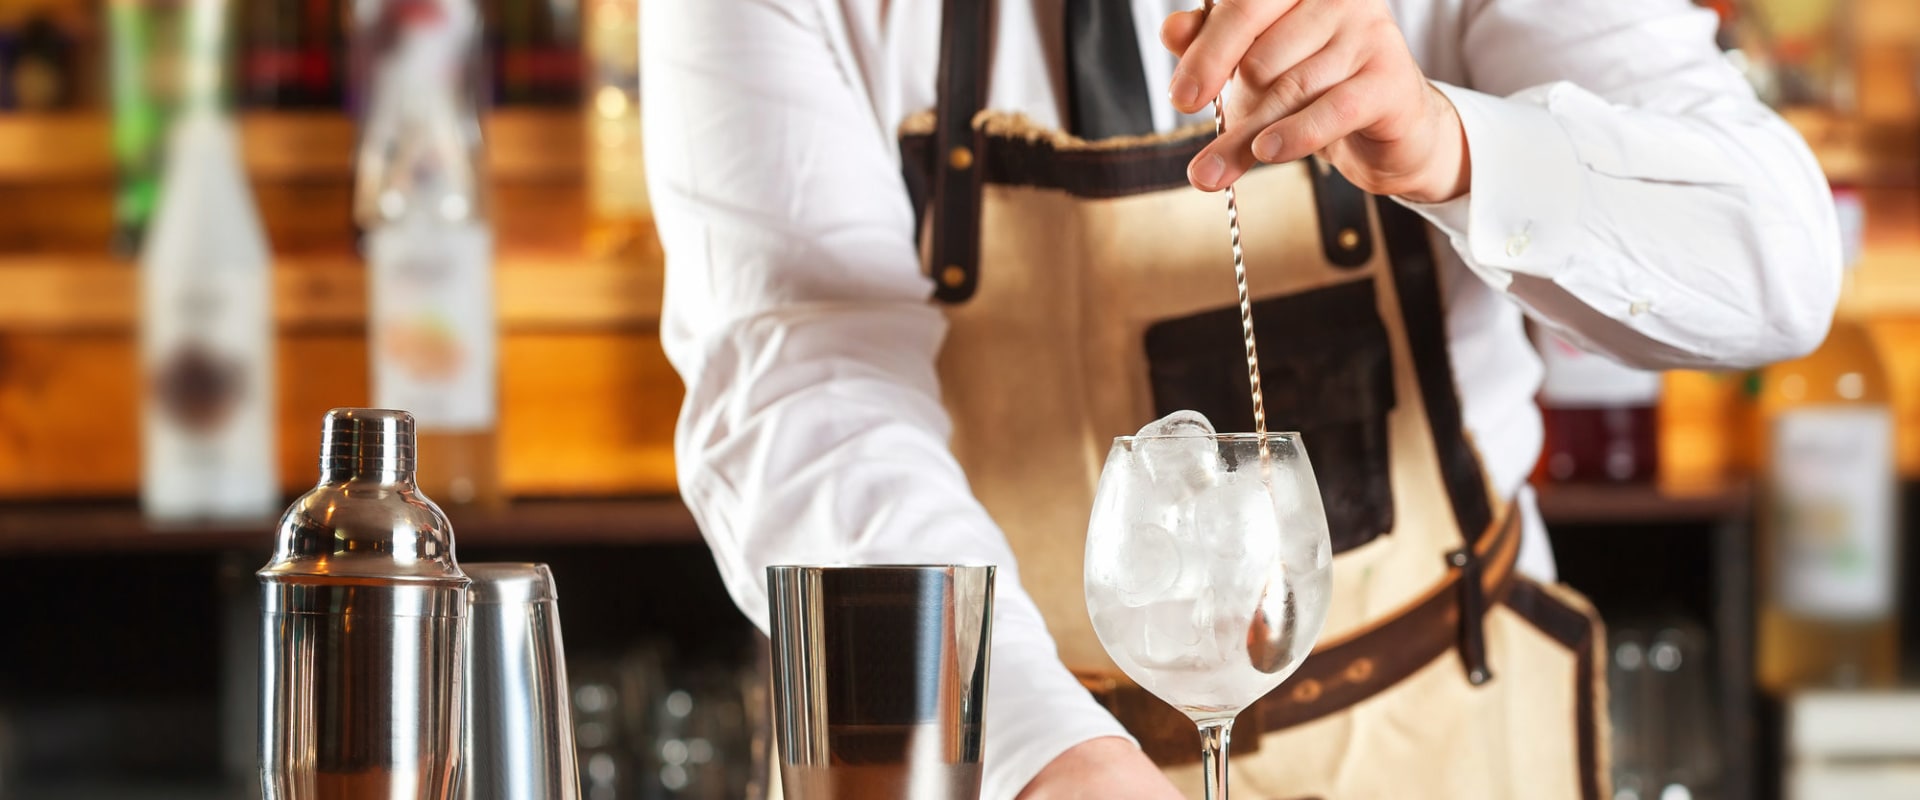 10 Essential Bar Tools Every Waiter Needs to Succeed